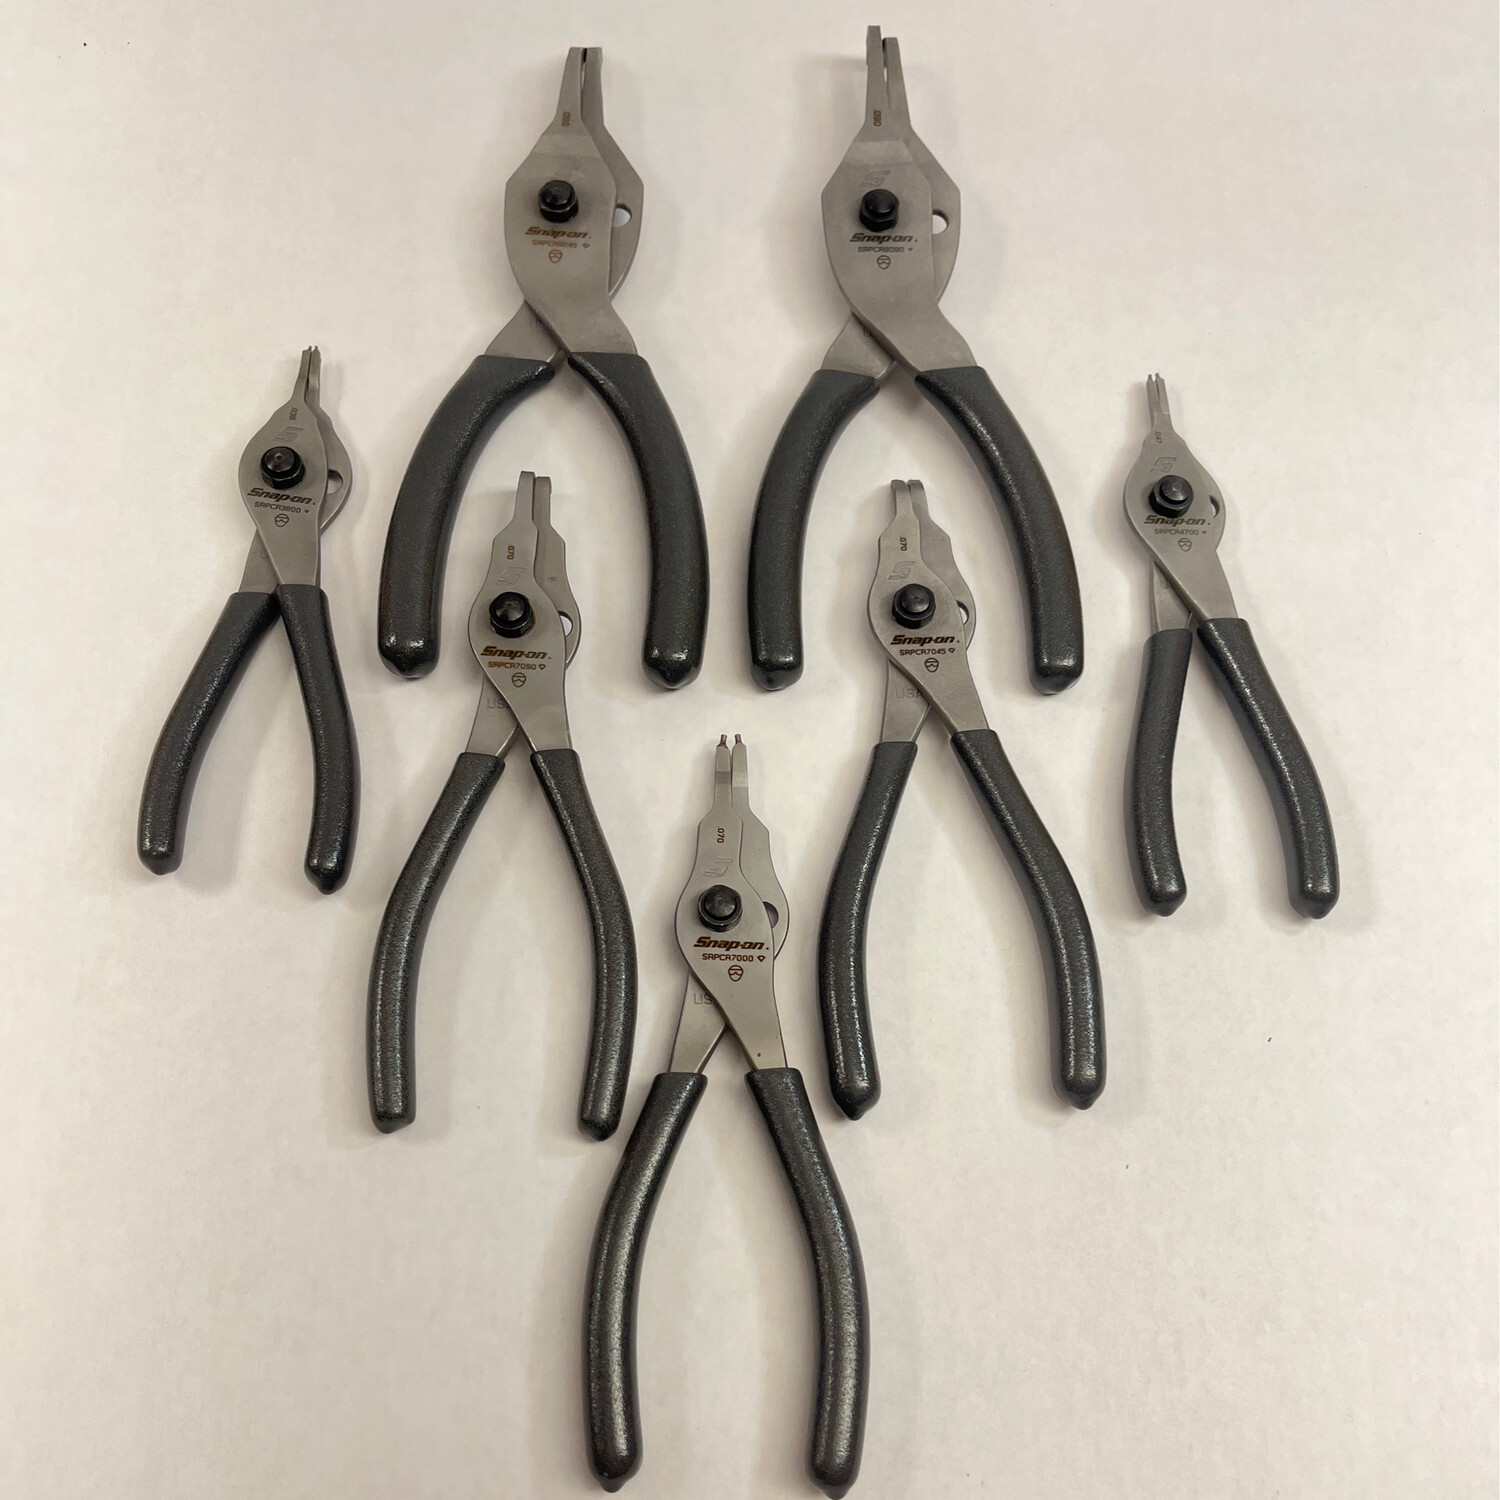 Snap On 7 Pc. Snap Ring Pliers Set, SRPCR107